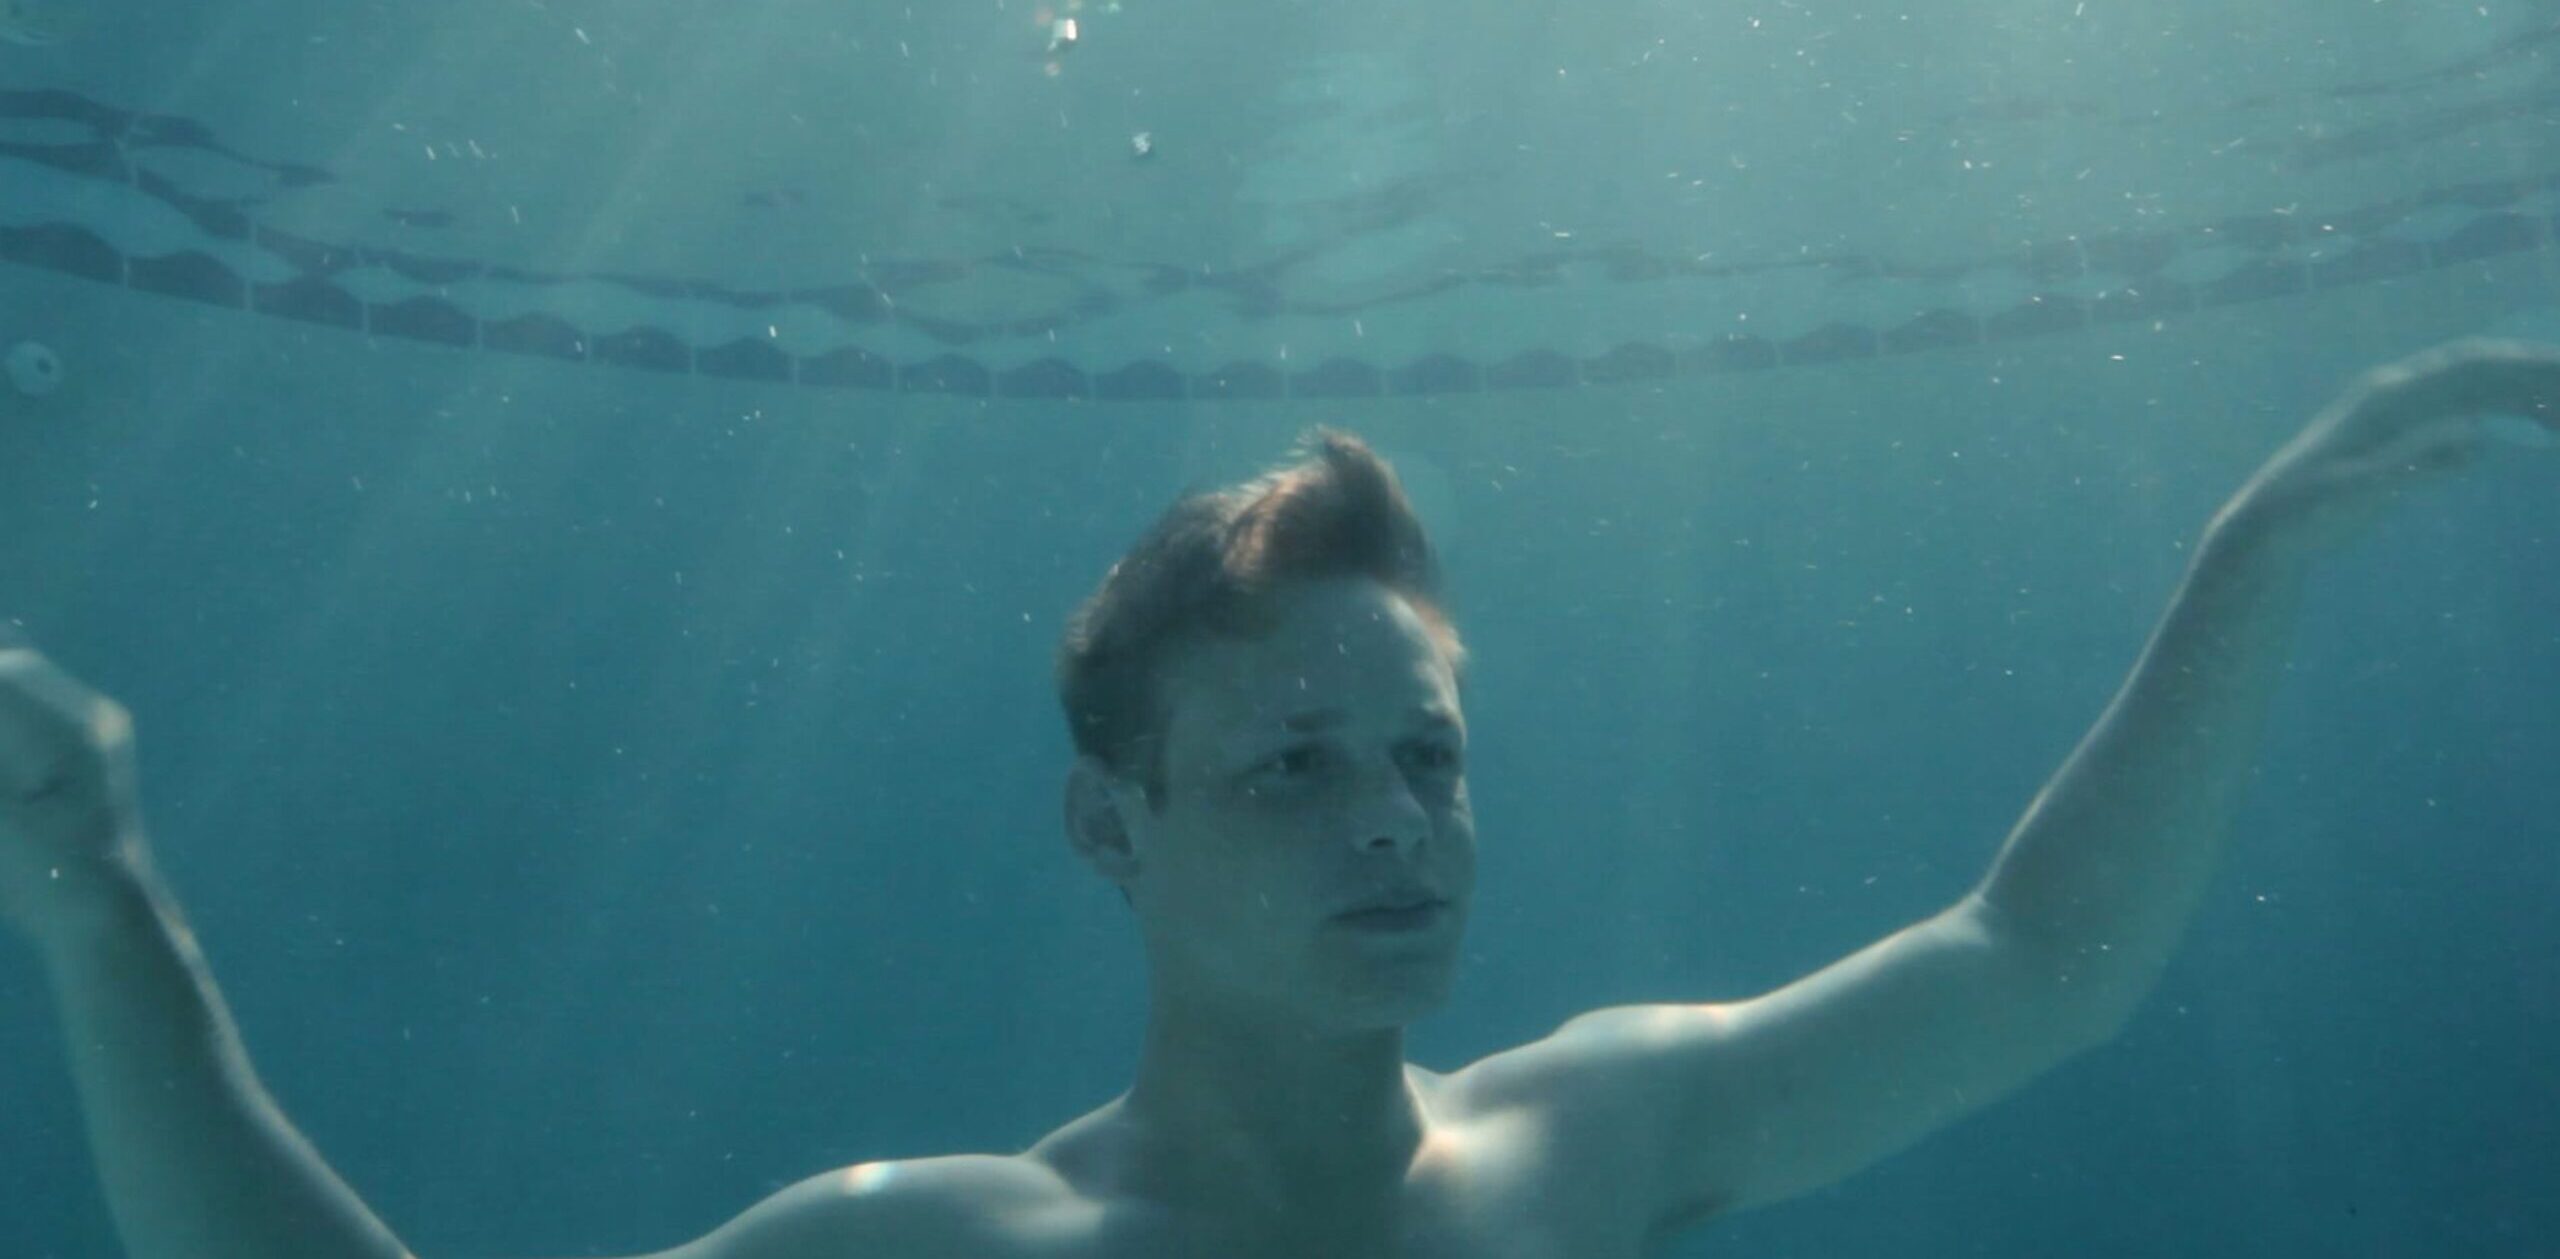 Beat the heat with these queer swim films - Philadelphia Gay News